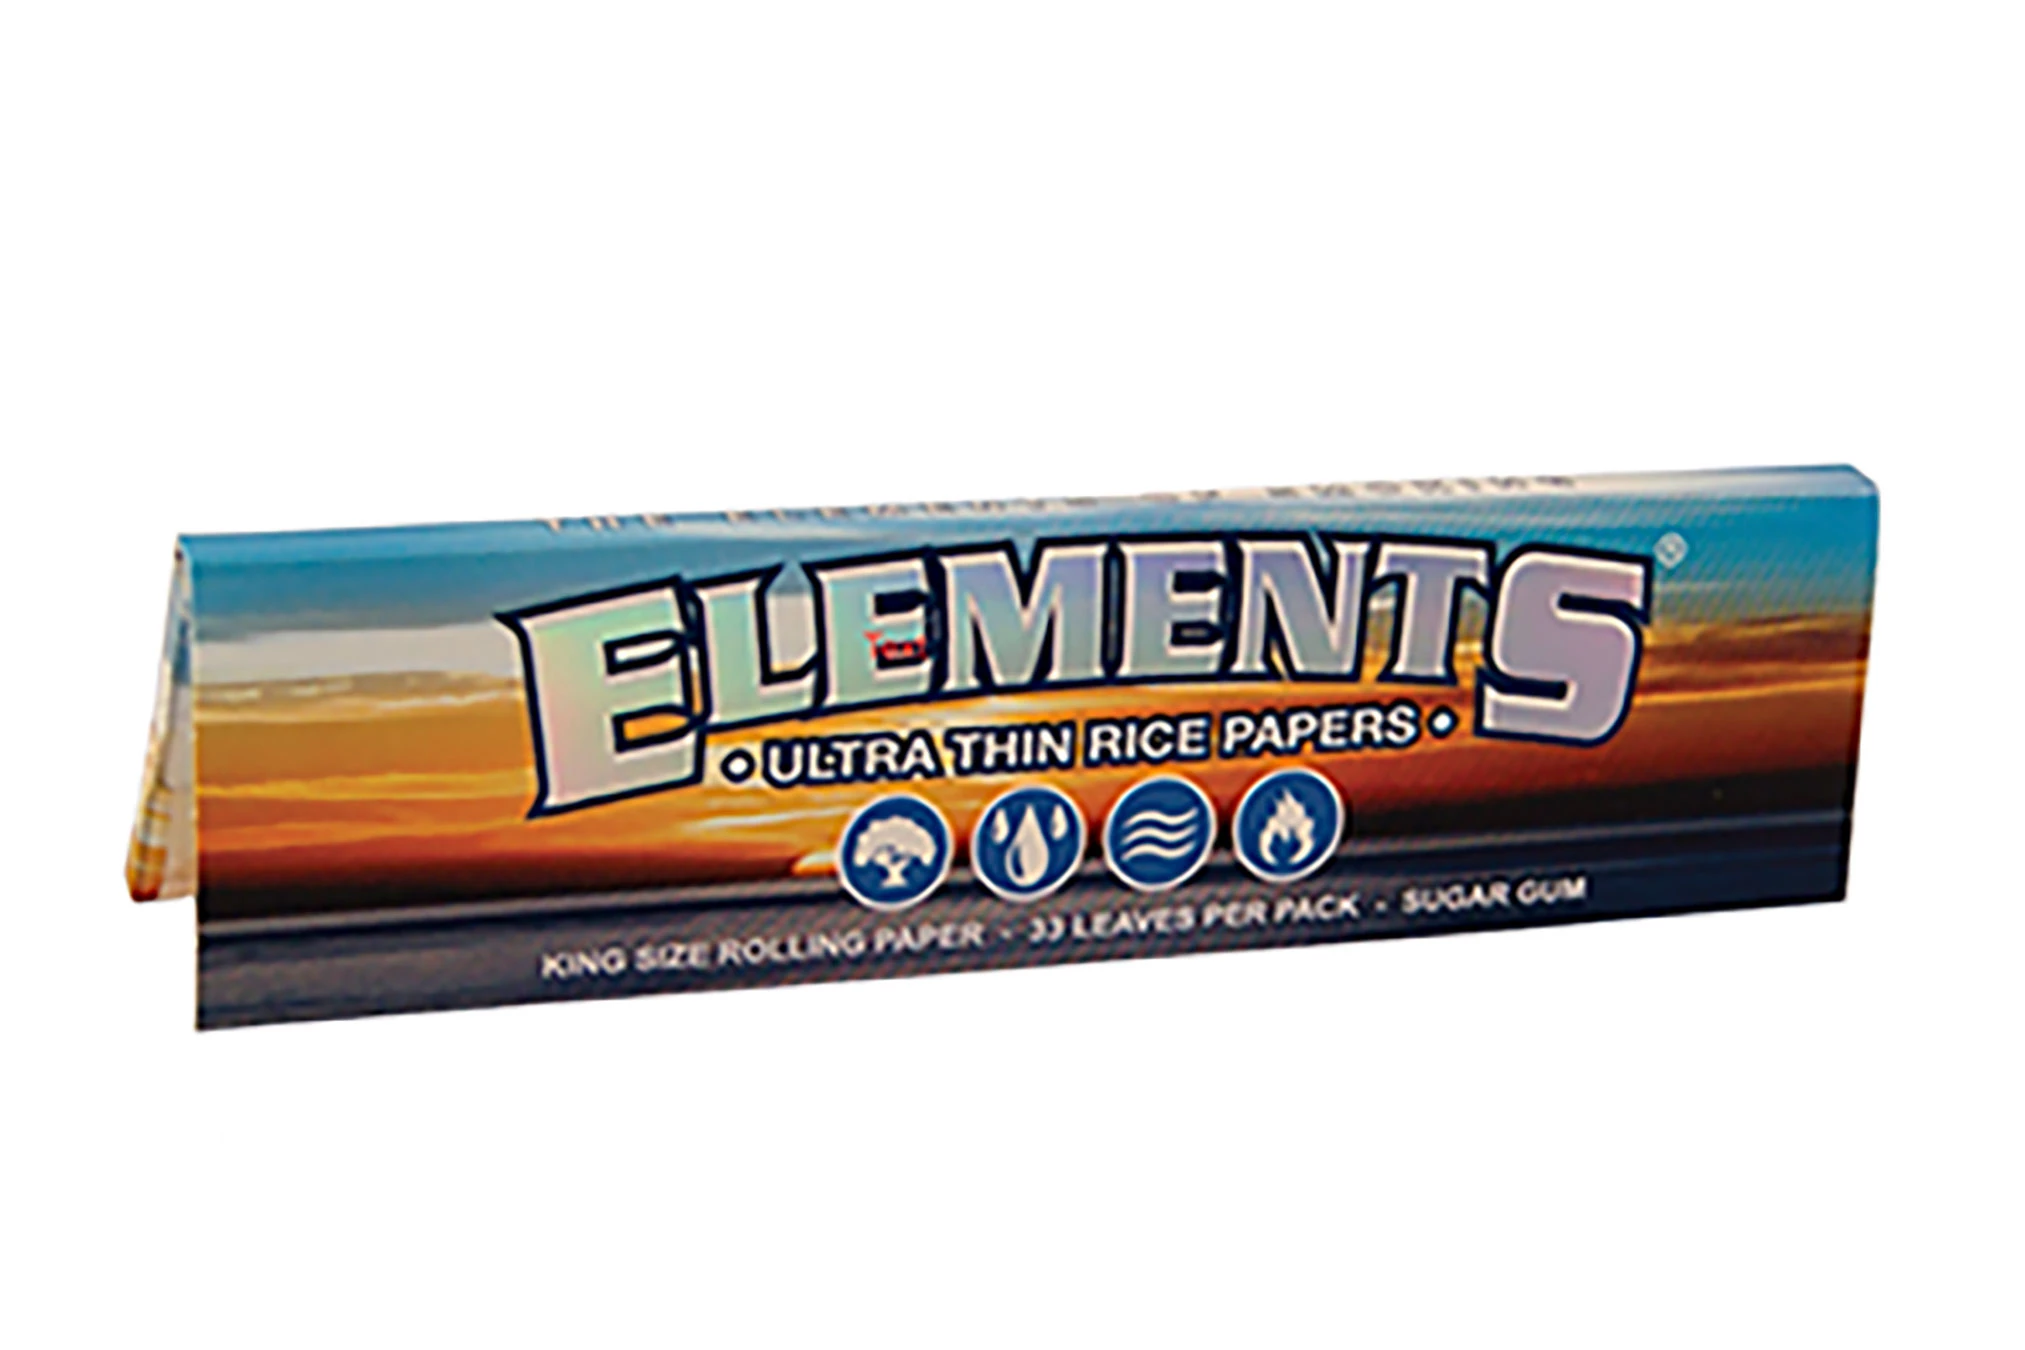 elements ultra thin rice papers